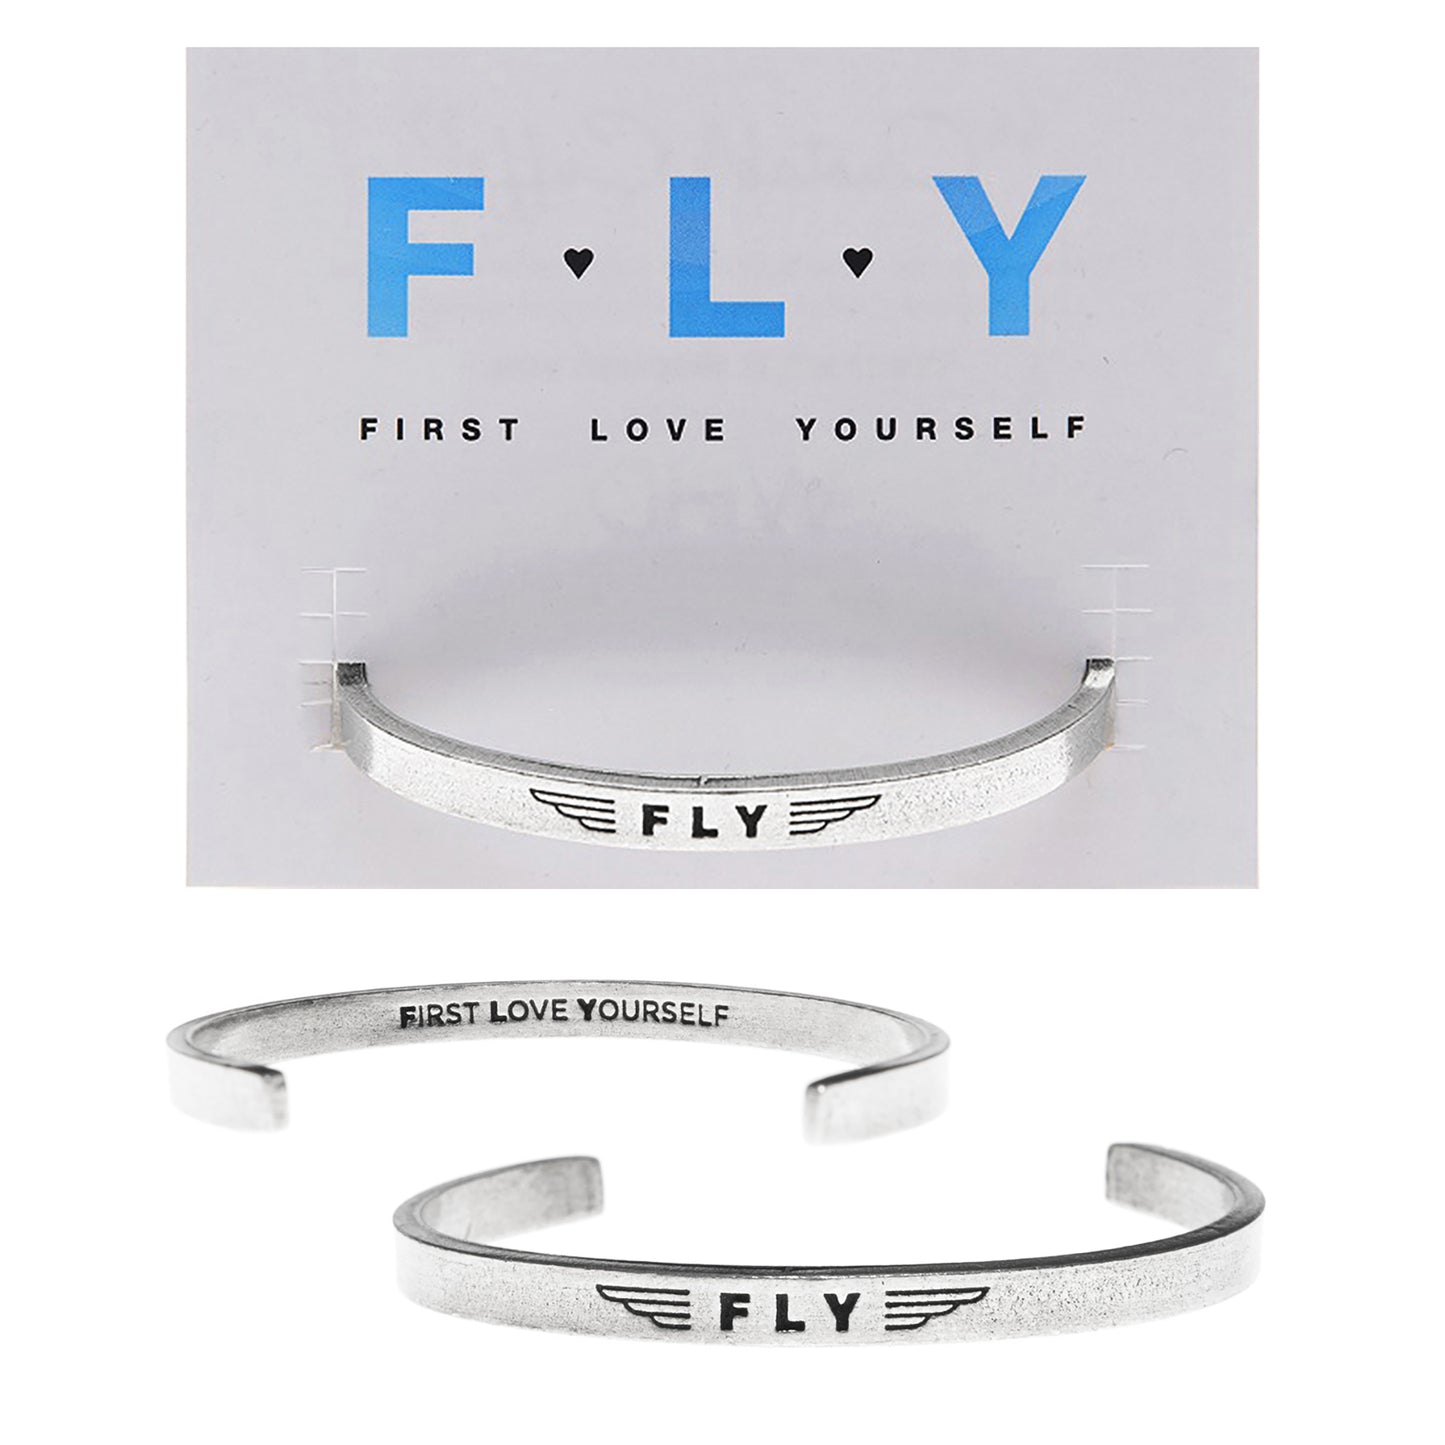 FLY - First Love Yourself Quotable Cuff Bracelet on FLY Backer Card